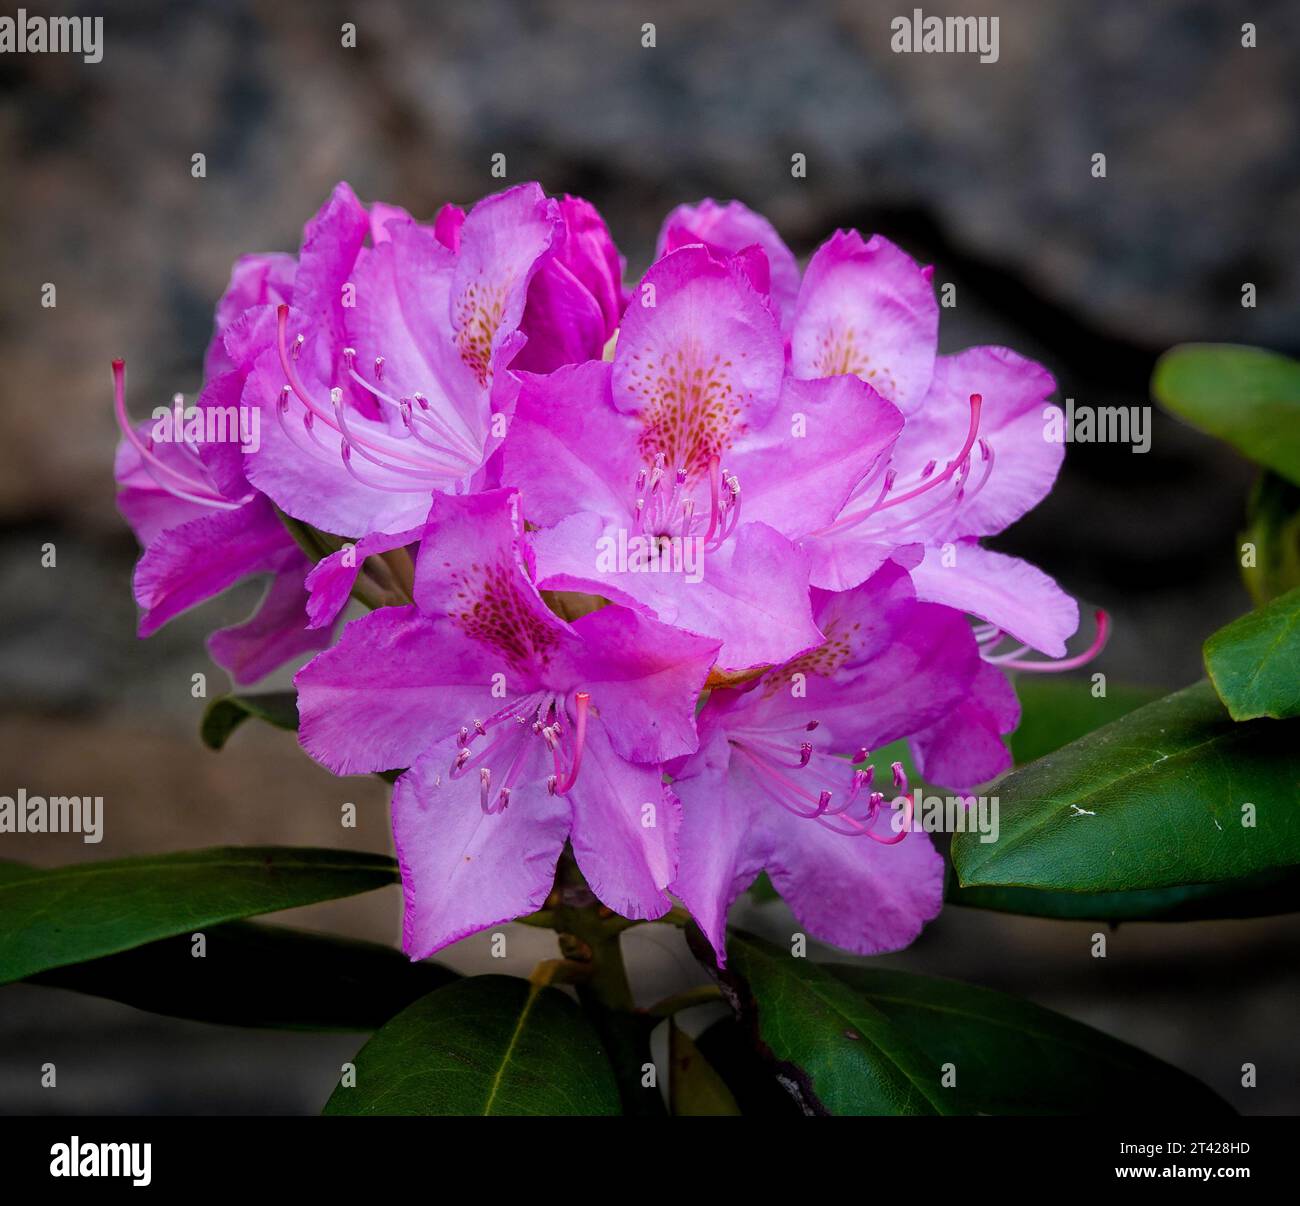 pink purple rhododendron flowers against a grey blurred background Stock Photo